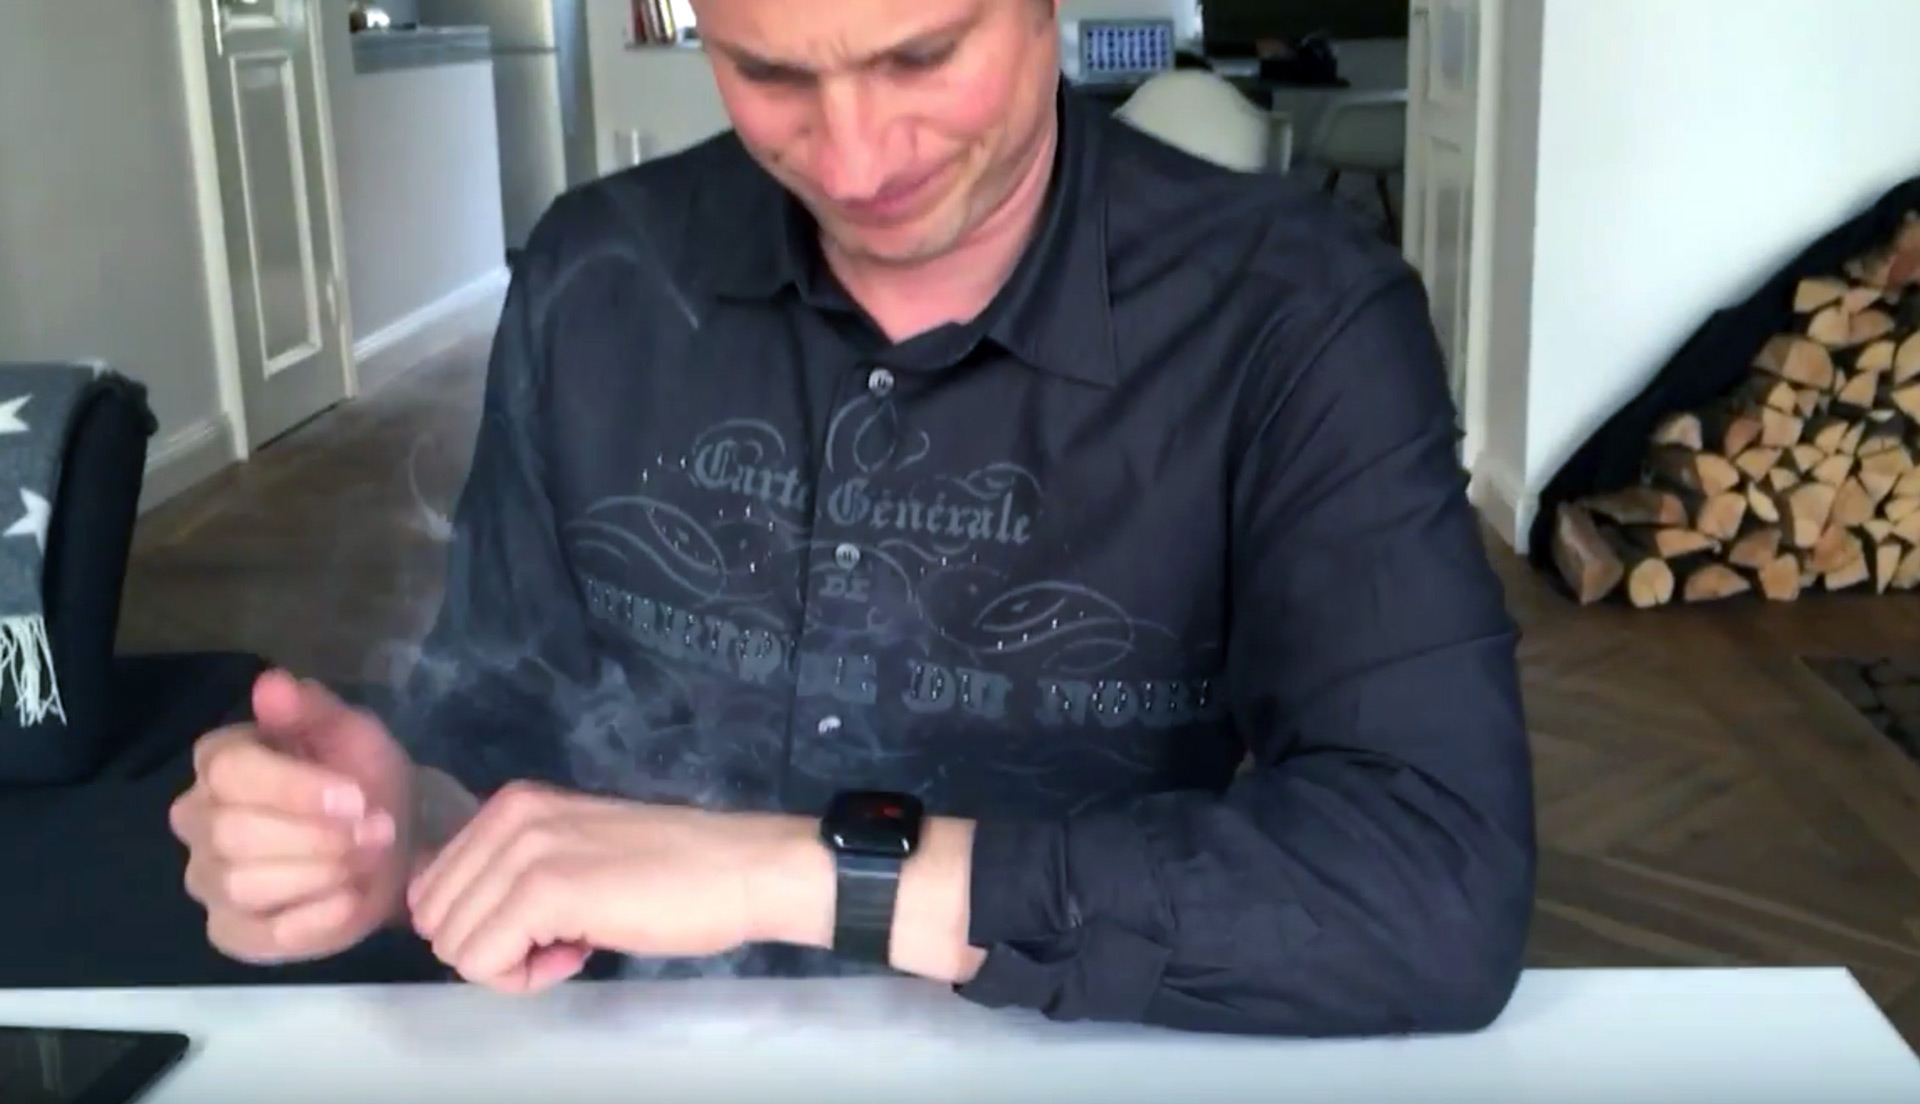 And the magician Simon Pierro is back, now with an Apple Watch!